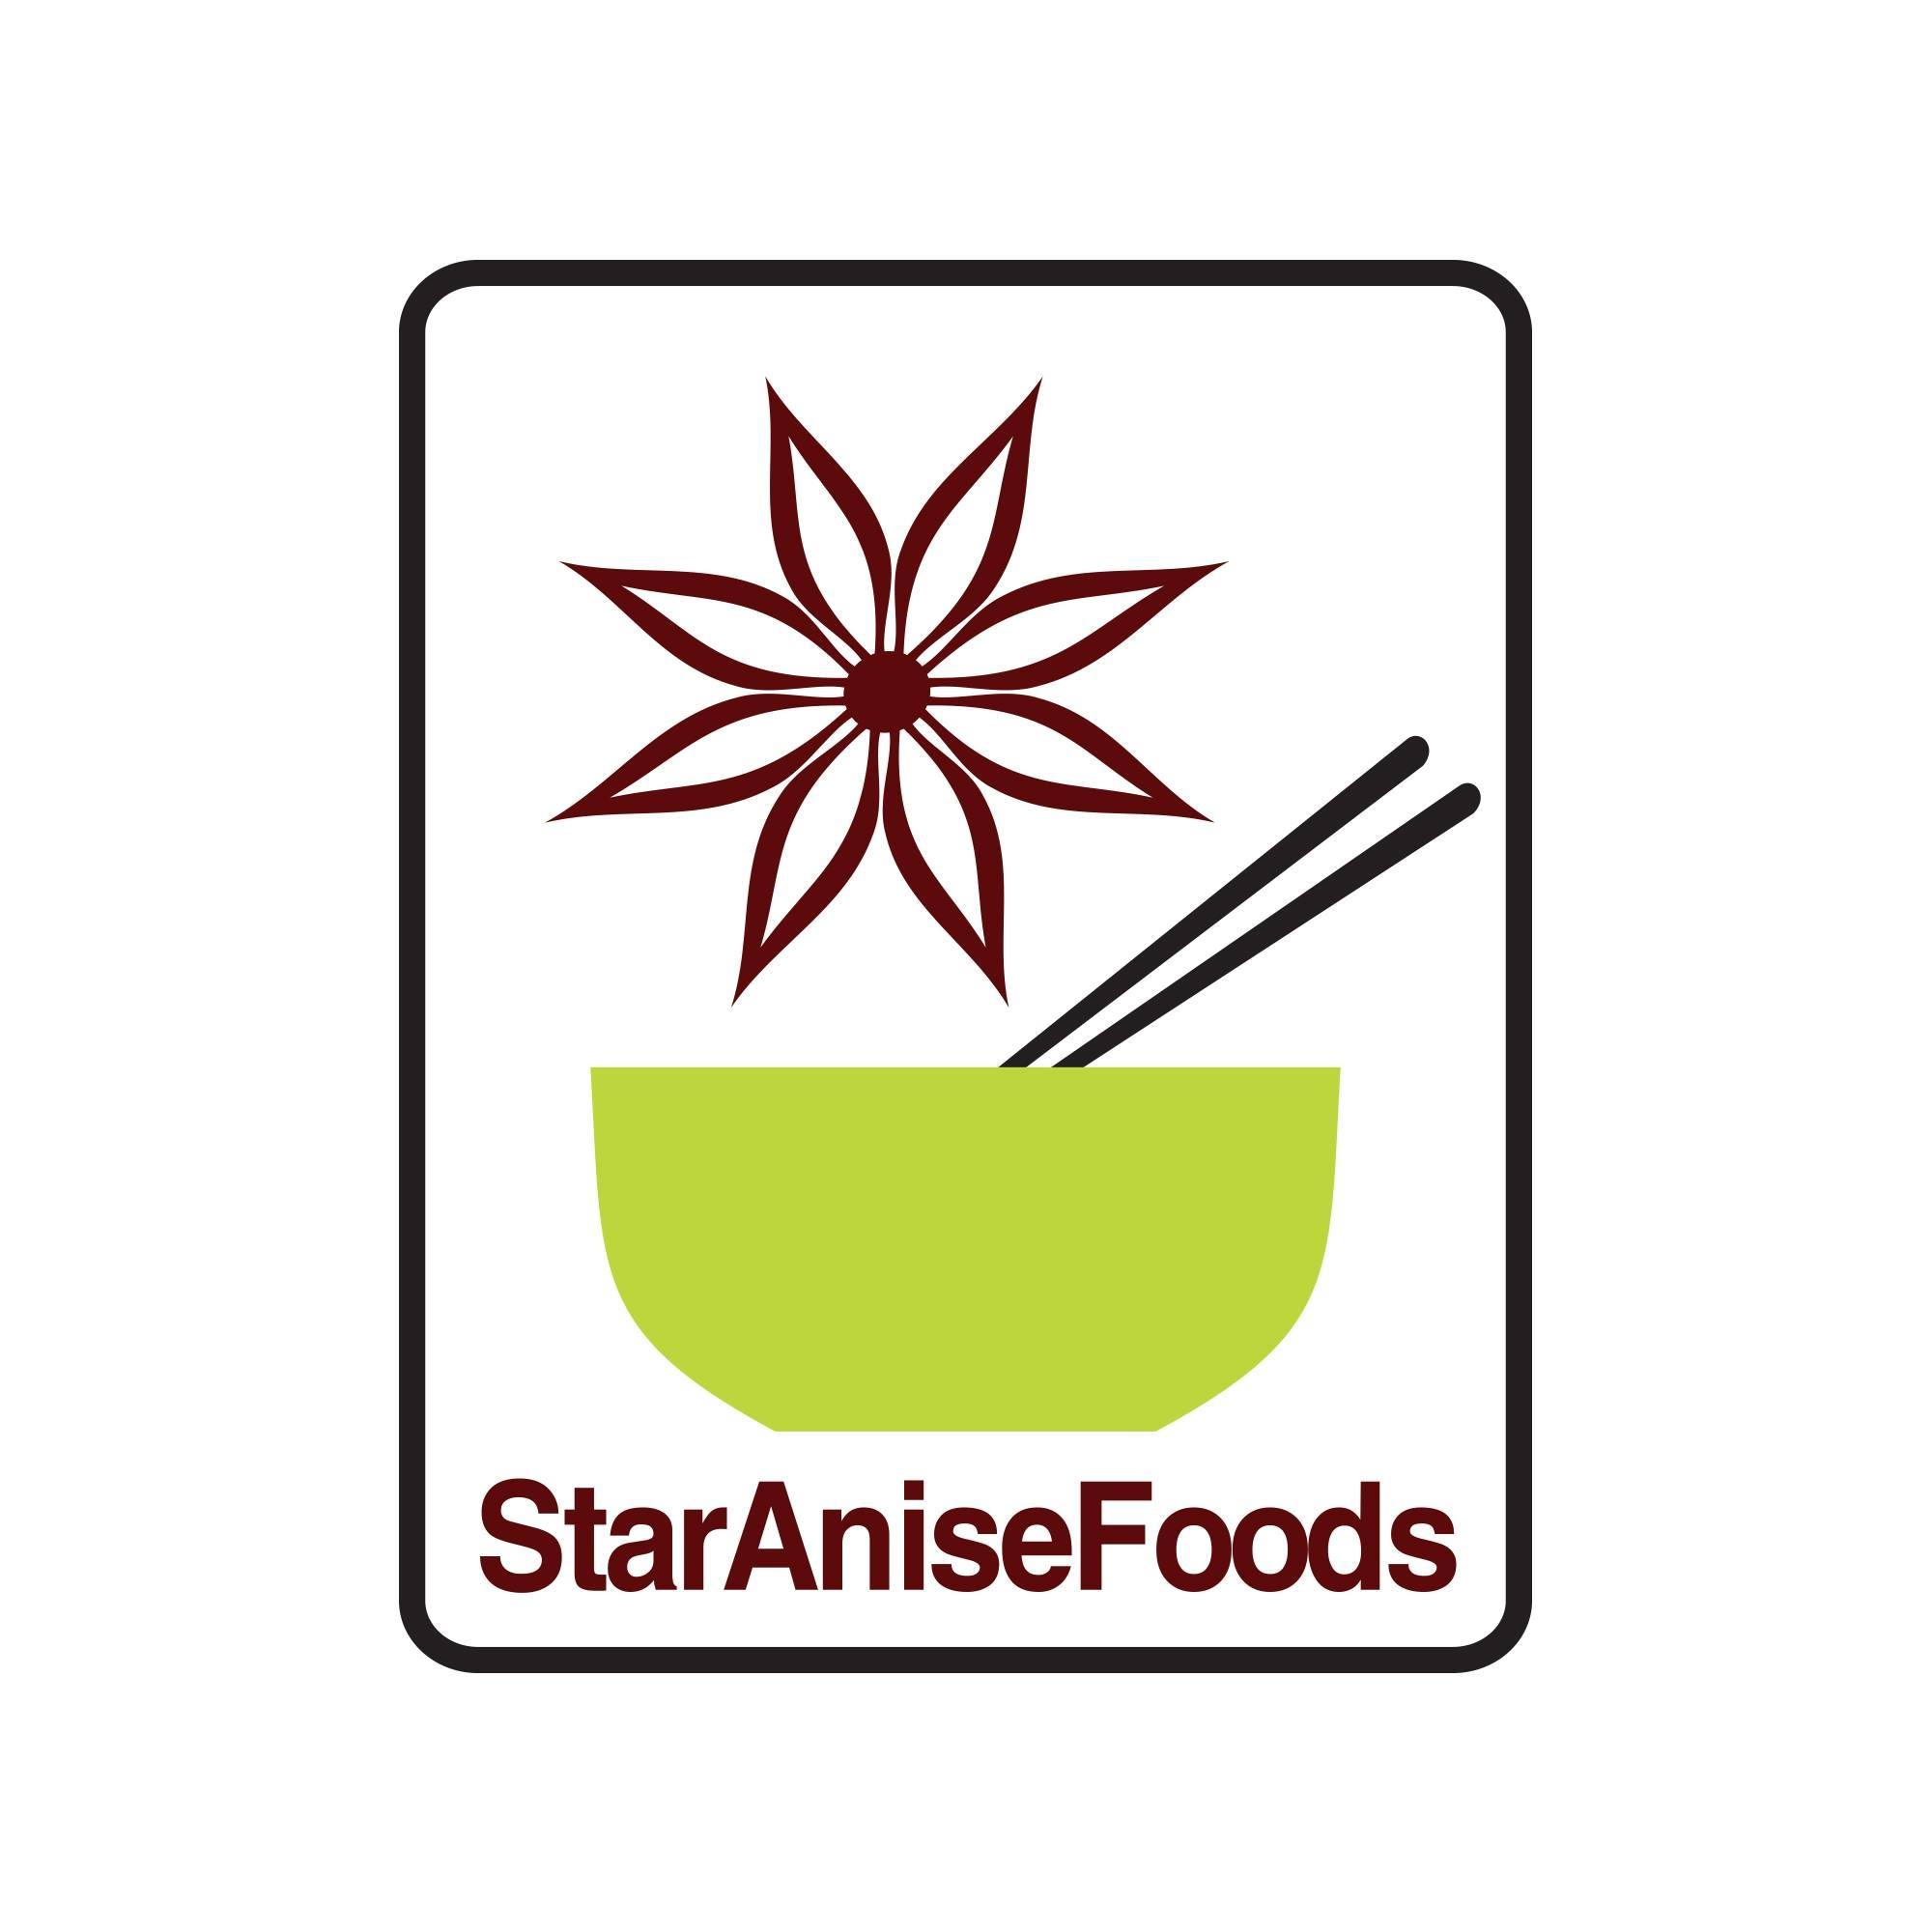 Star Anise Foods